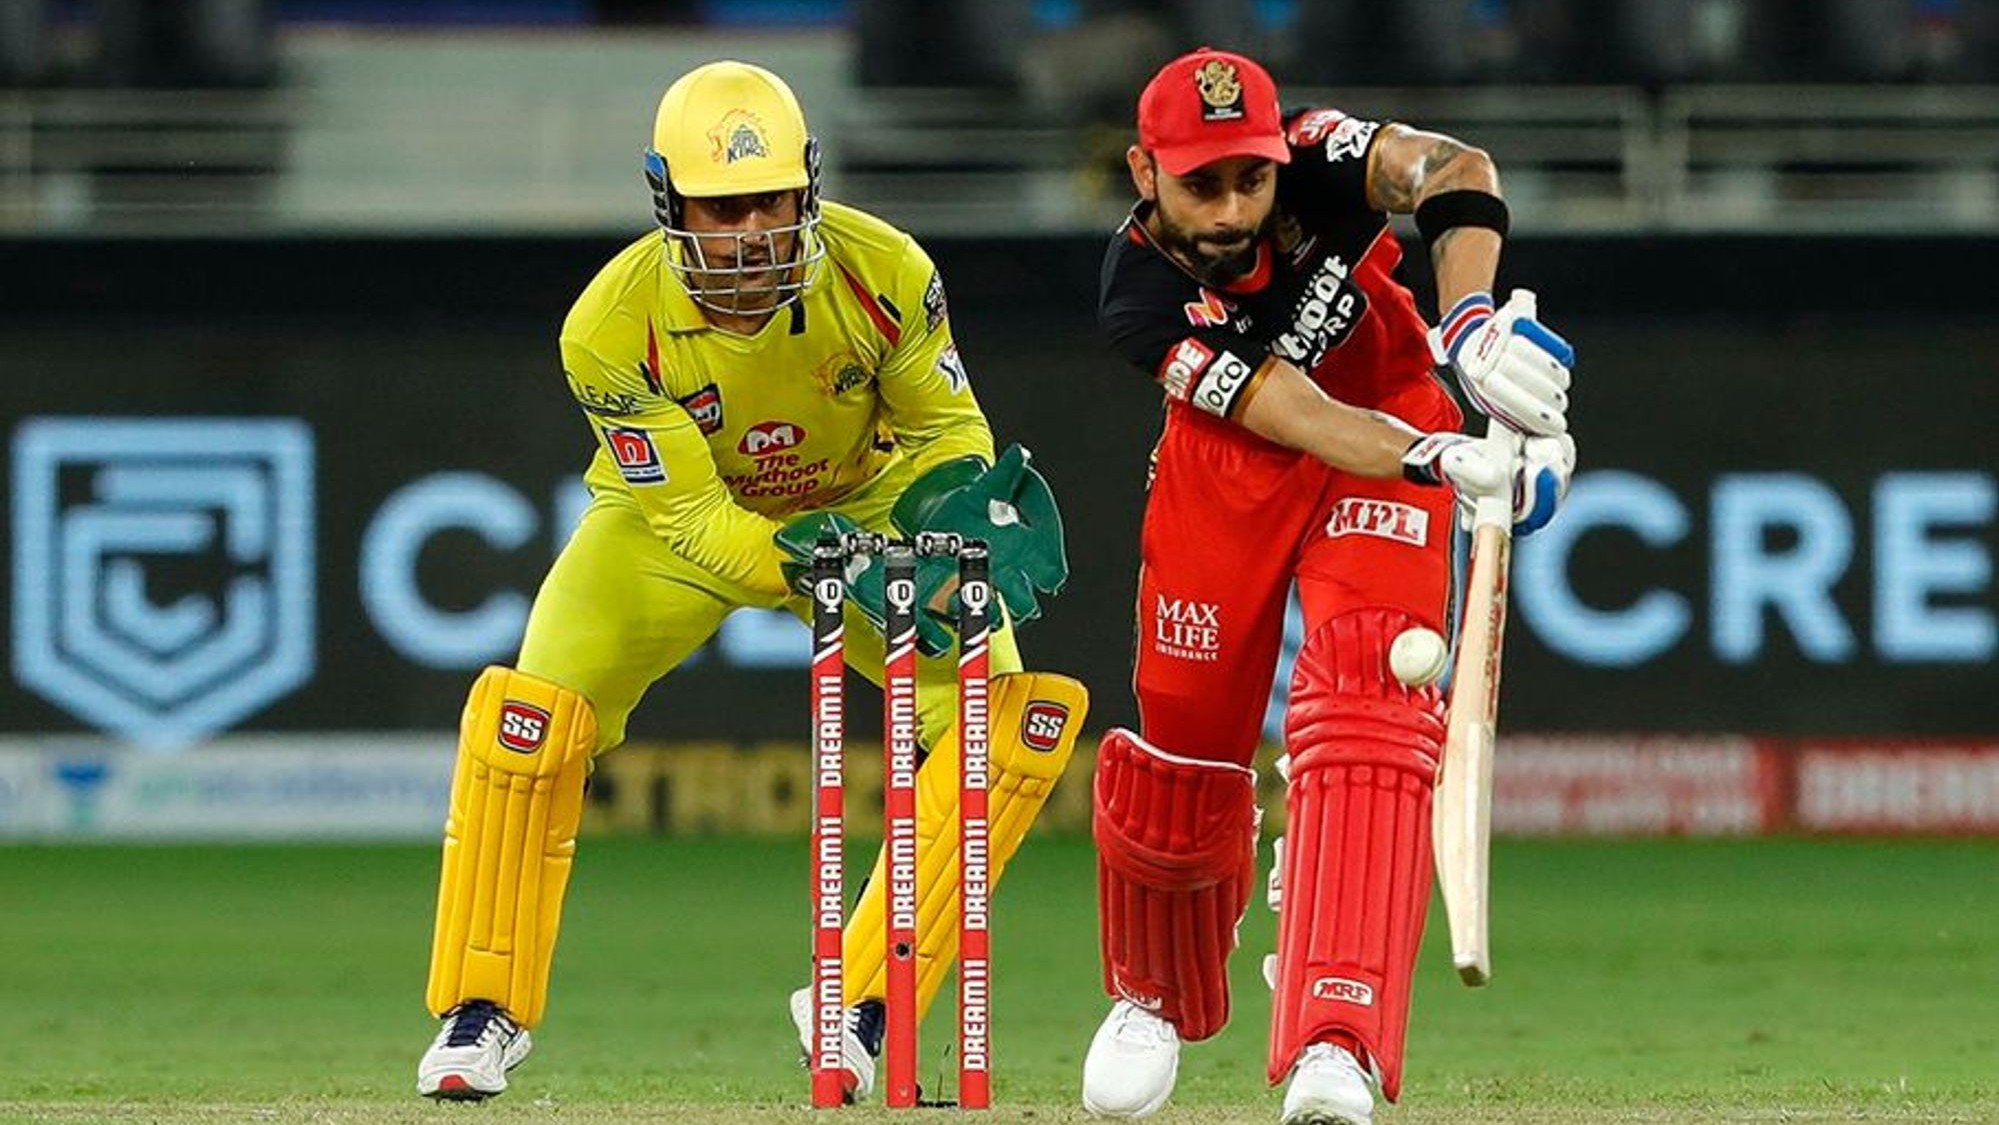 IPL 2020: Match 44, RCB v CSK - Statistical Preview of the Match 